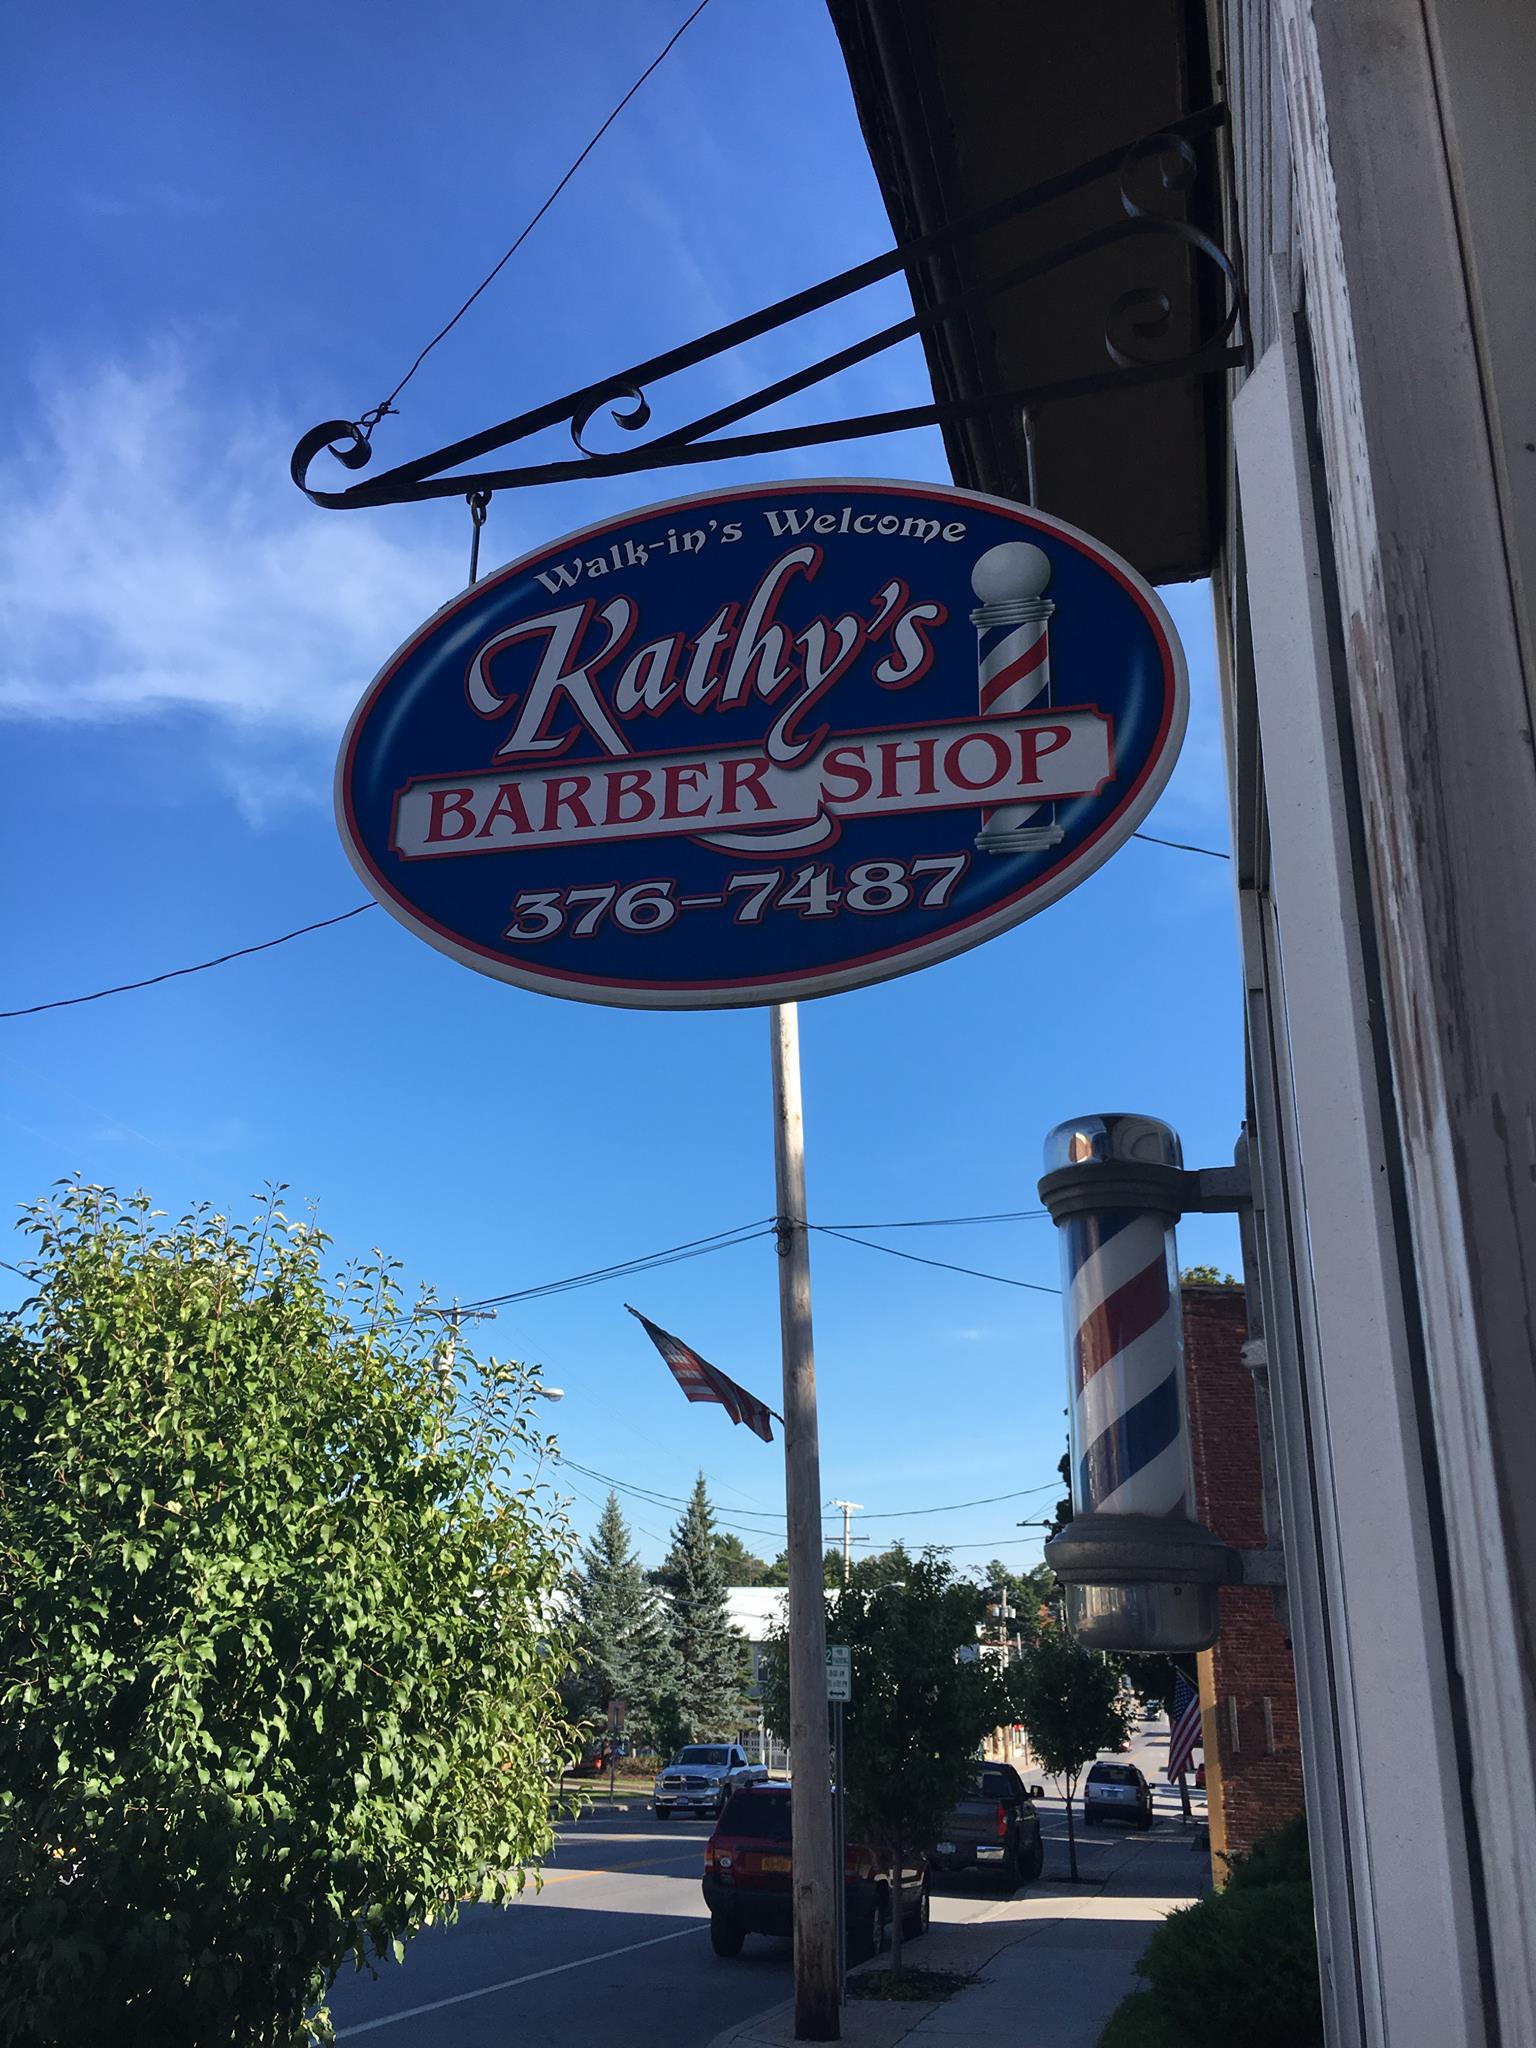 Kathy's Barber Shop 7547 S State St, Lowville New York 13367